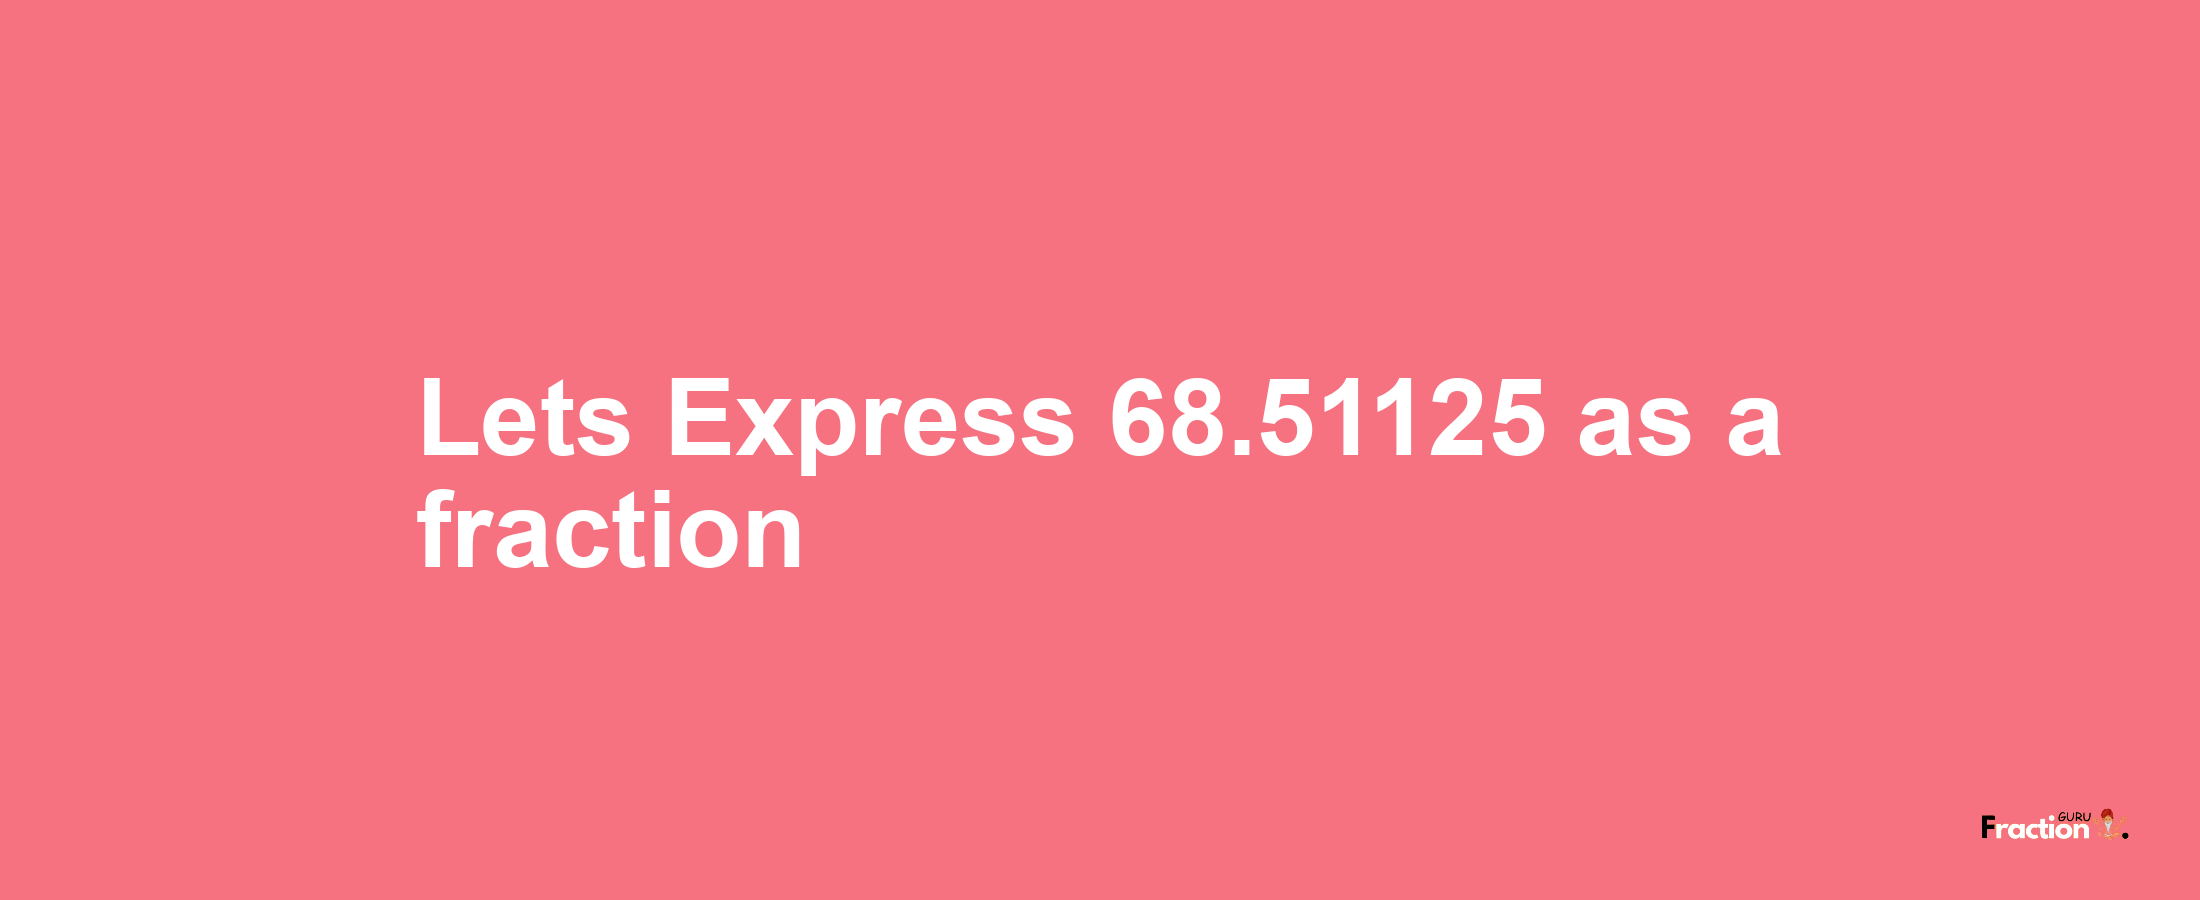 Lets Express 68.51125 as afraction